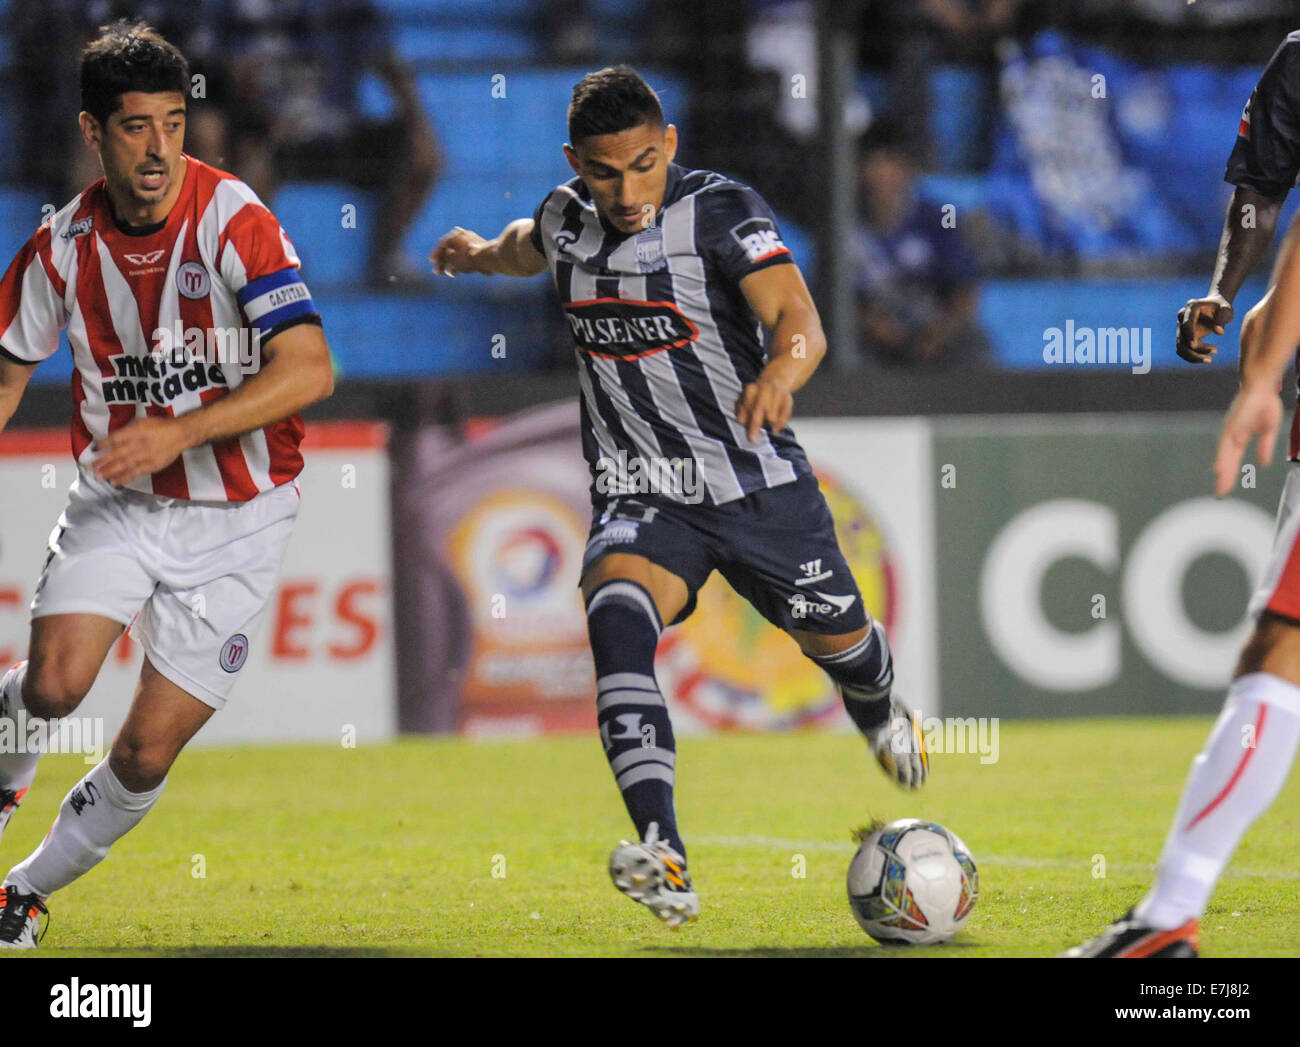 Guayaquil, Ecuador. 18th Sep, 2014. Angel Mena (R) of Ecuador's Emelec, vies for the ball with Cristian Gonzalez (L) of Uruguay's River Plate, during a match of the South American Cup, held in the Capwell Stadium, in Guayaquil, Ecuador, on Sept. 18, 2014. © Str/Xinhua/Alamy Live News Stock Photo